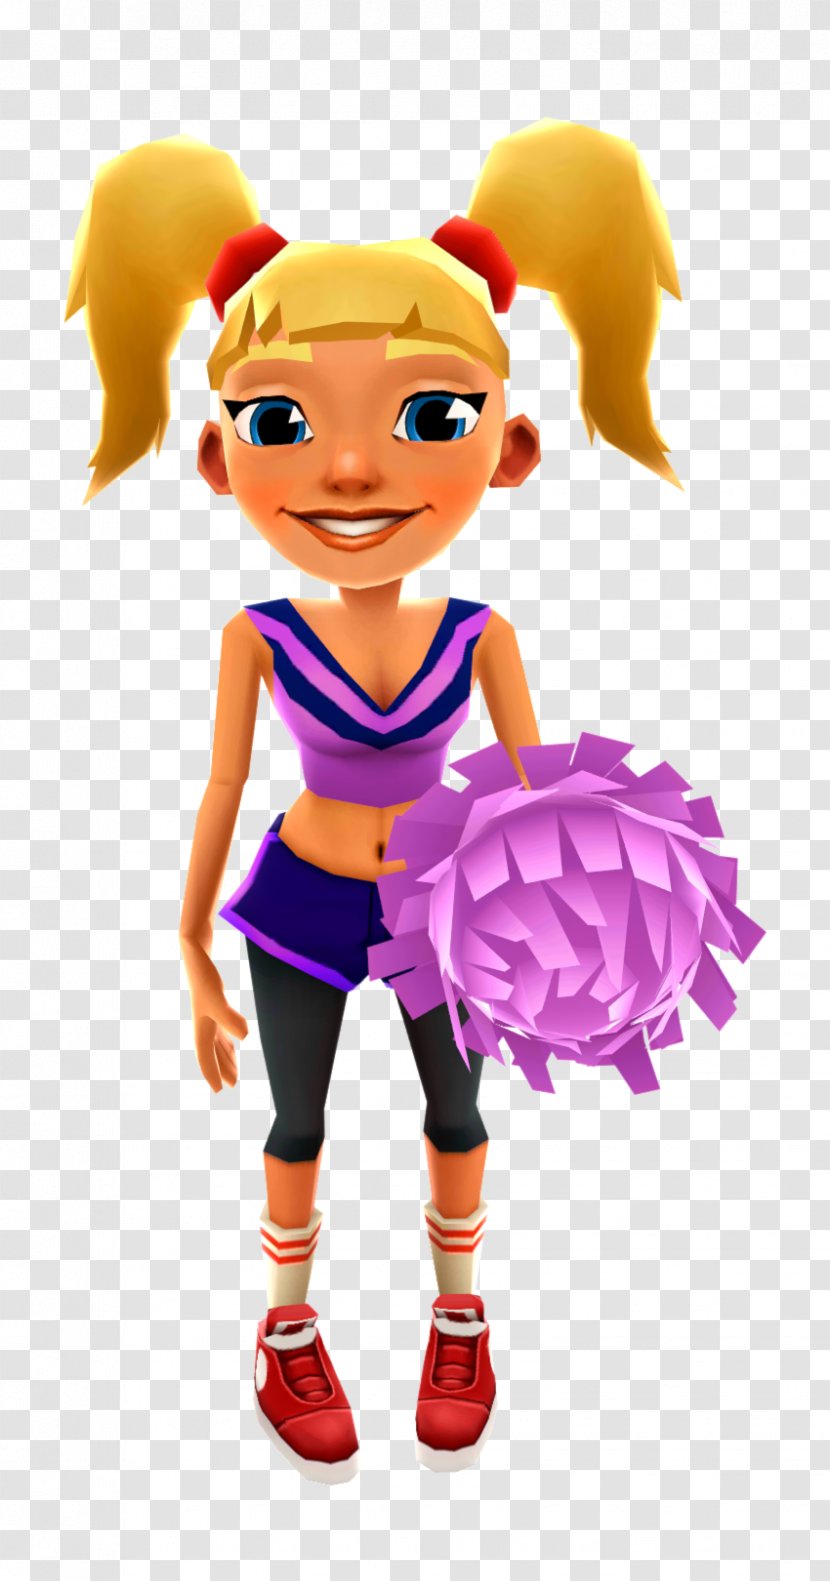 Subway Surfers Android Amazon Appstore - Figurine - Surfer Transparent PNG